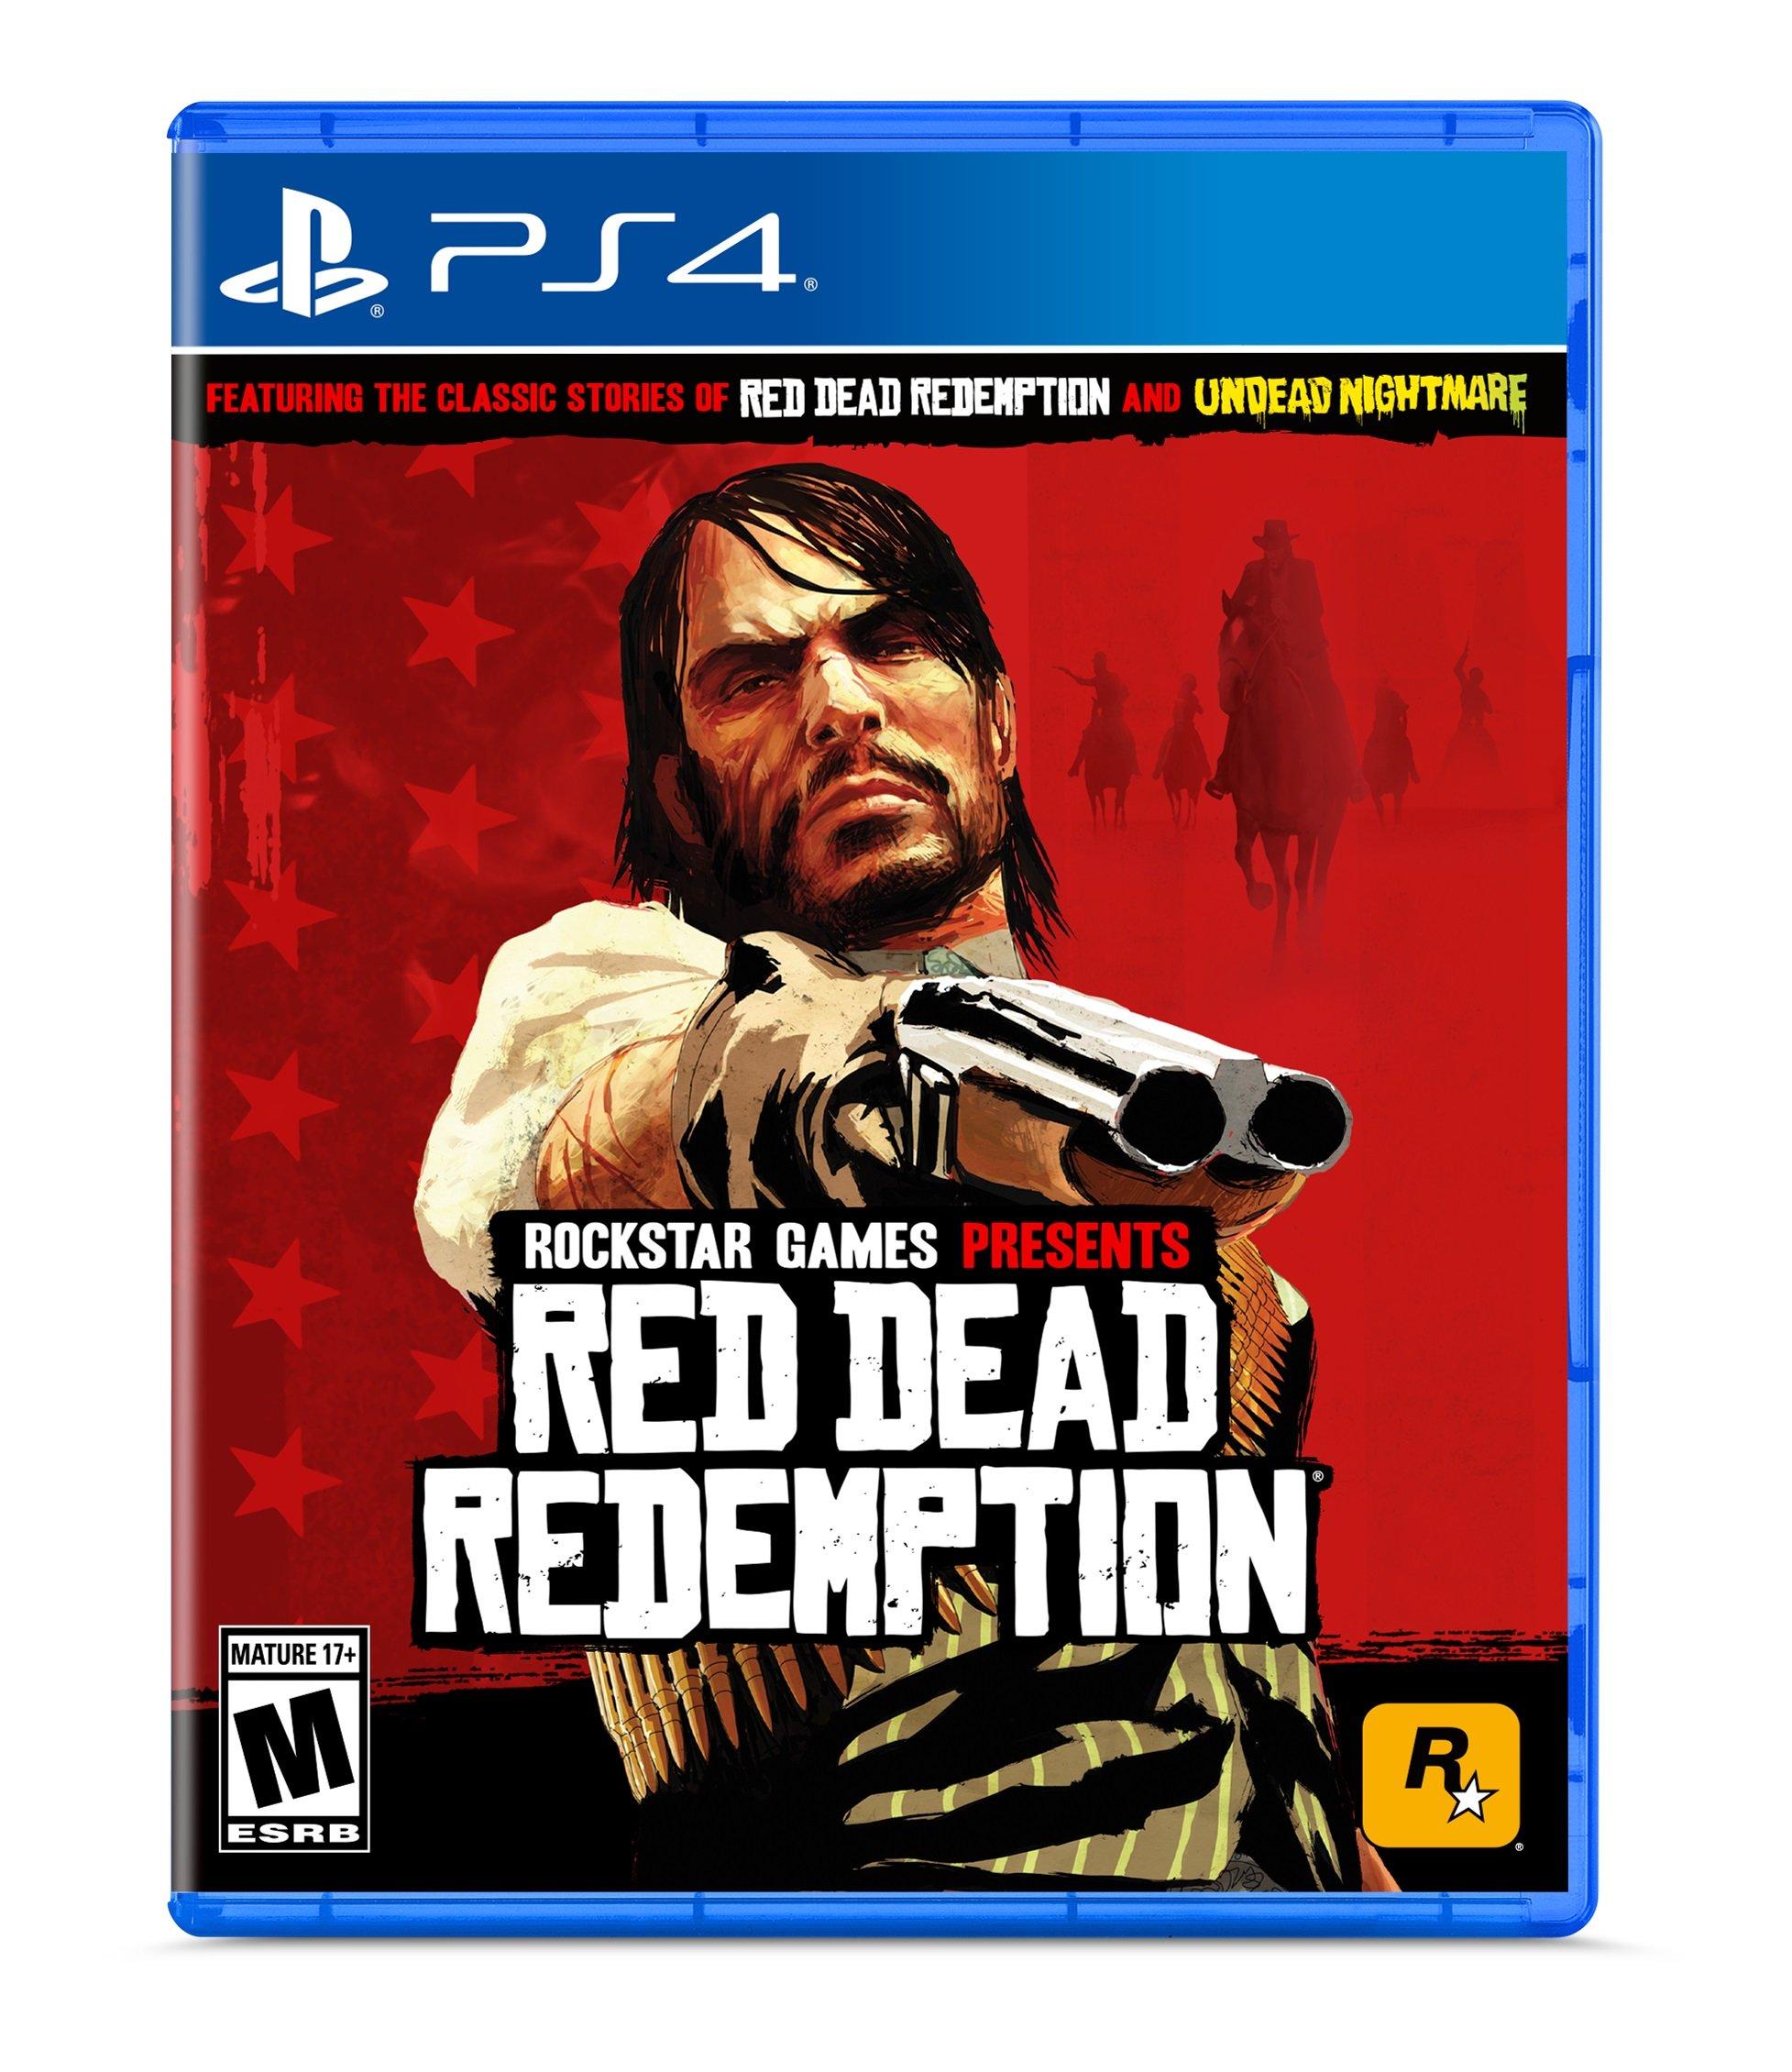 Red Dead Redemption (with Undead Nightmare DLC) - PlayStation 4